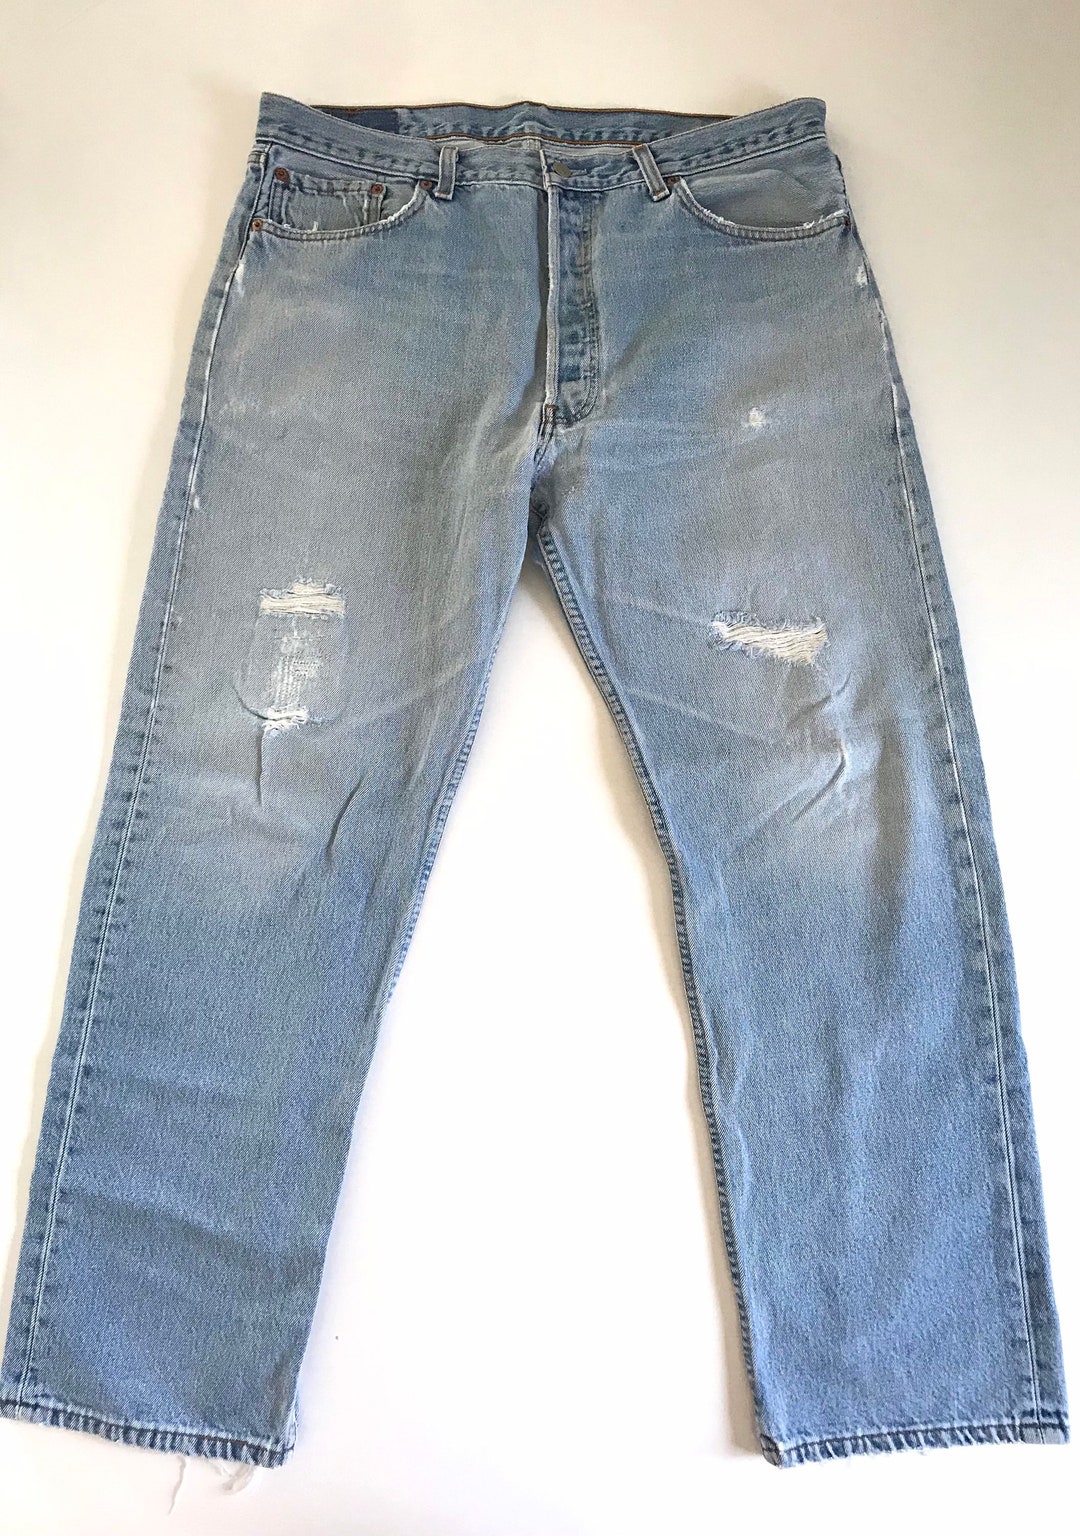 1990s Vintage Levis 501 Jeans Well Worn Holes Rips - Etsy